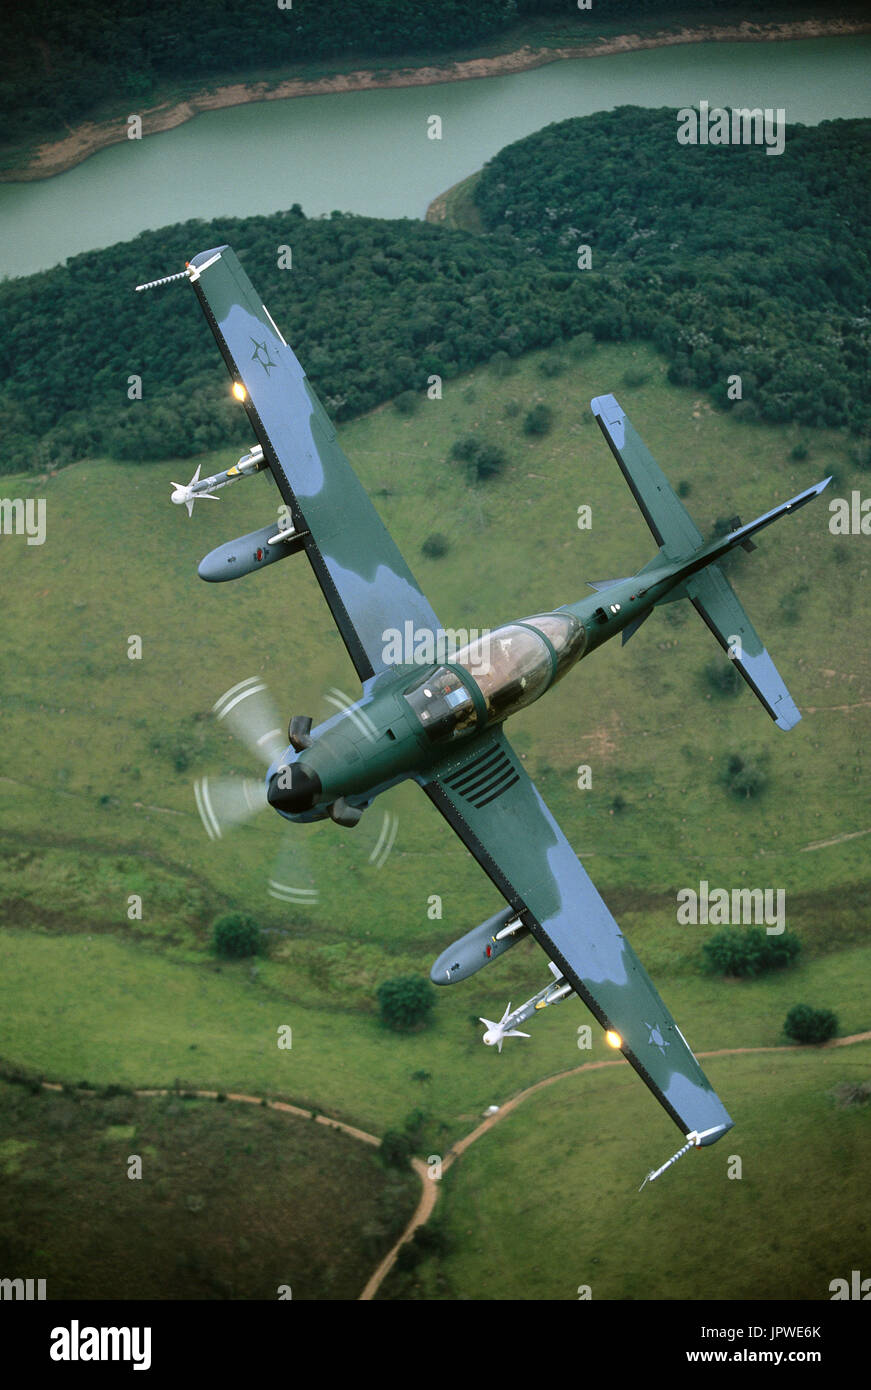 Brazilian Air Force Embraer EMB-314 Super Tucano banking over river, fields and trees Stock Photo